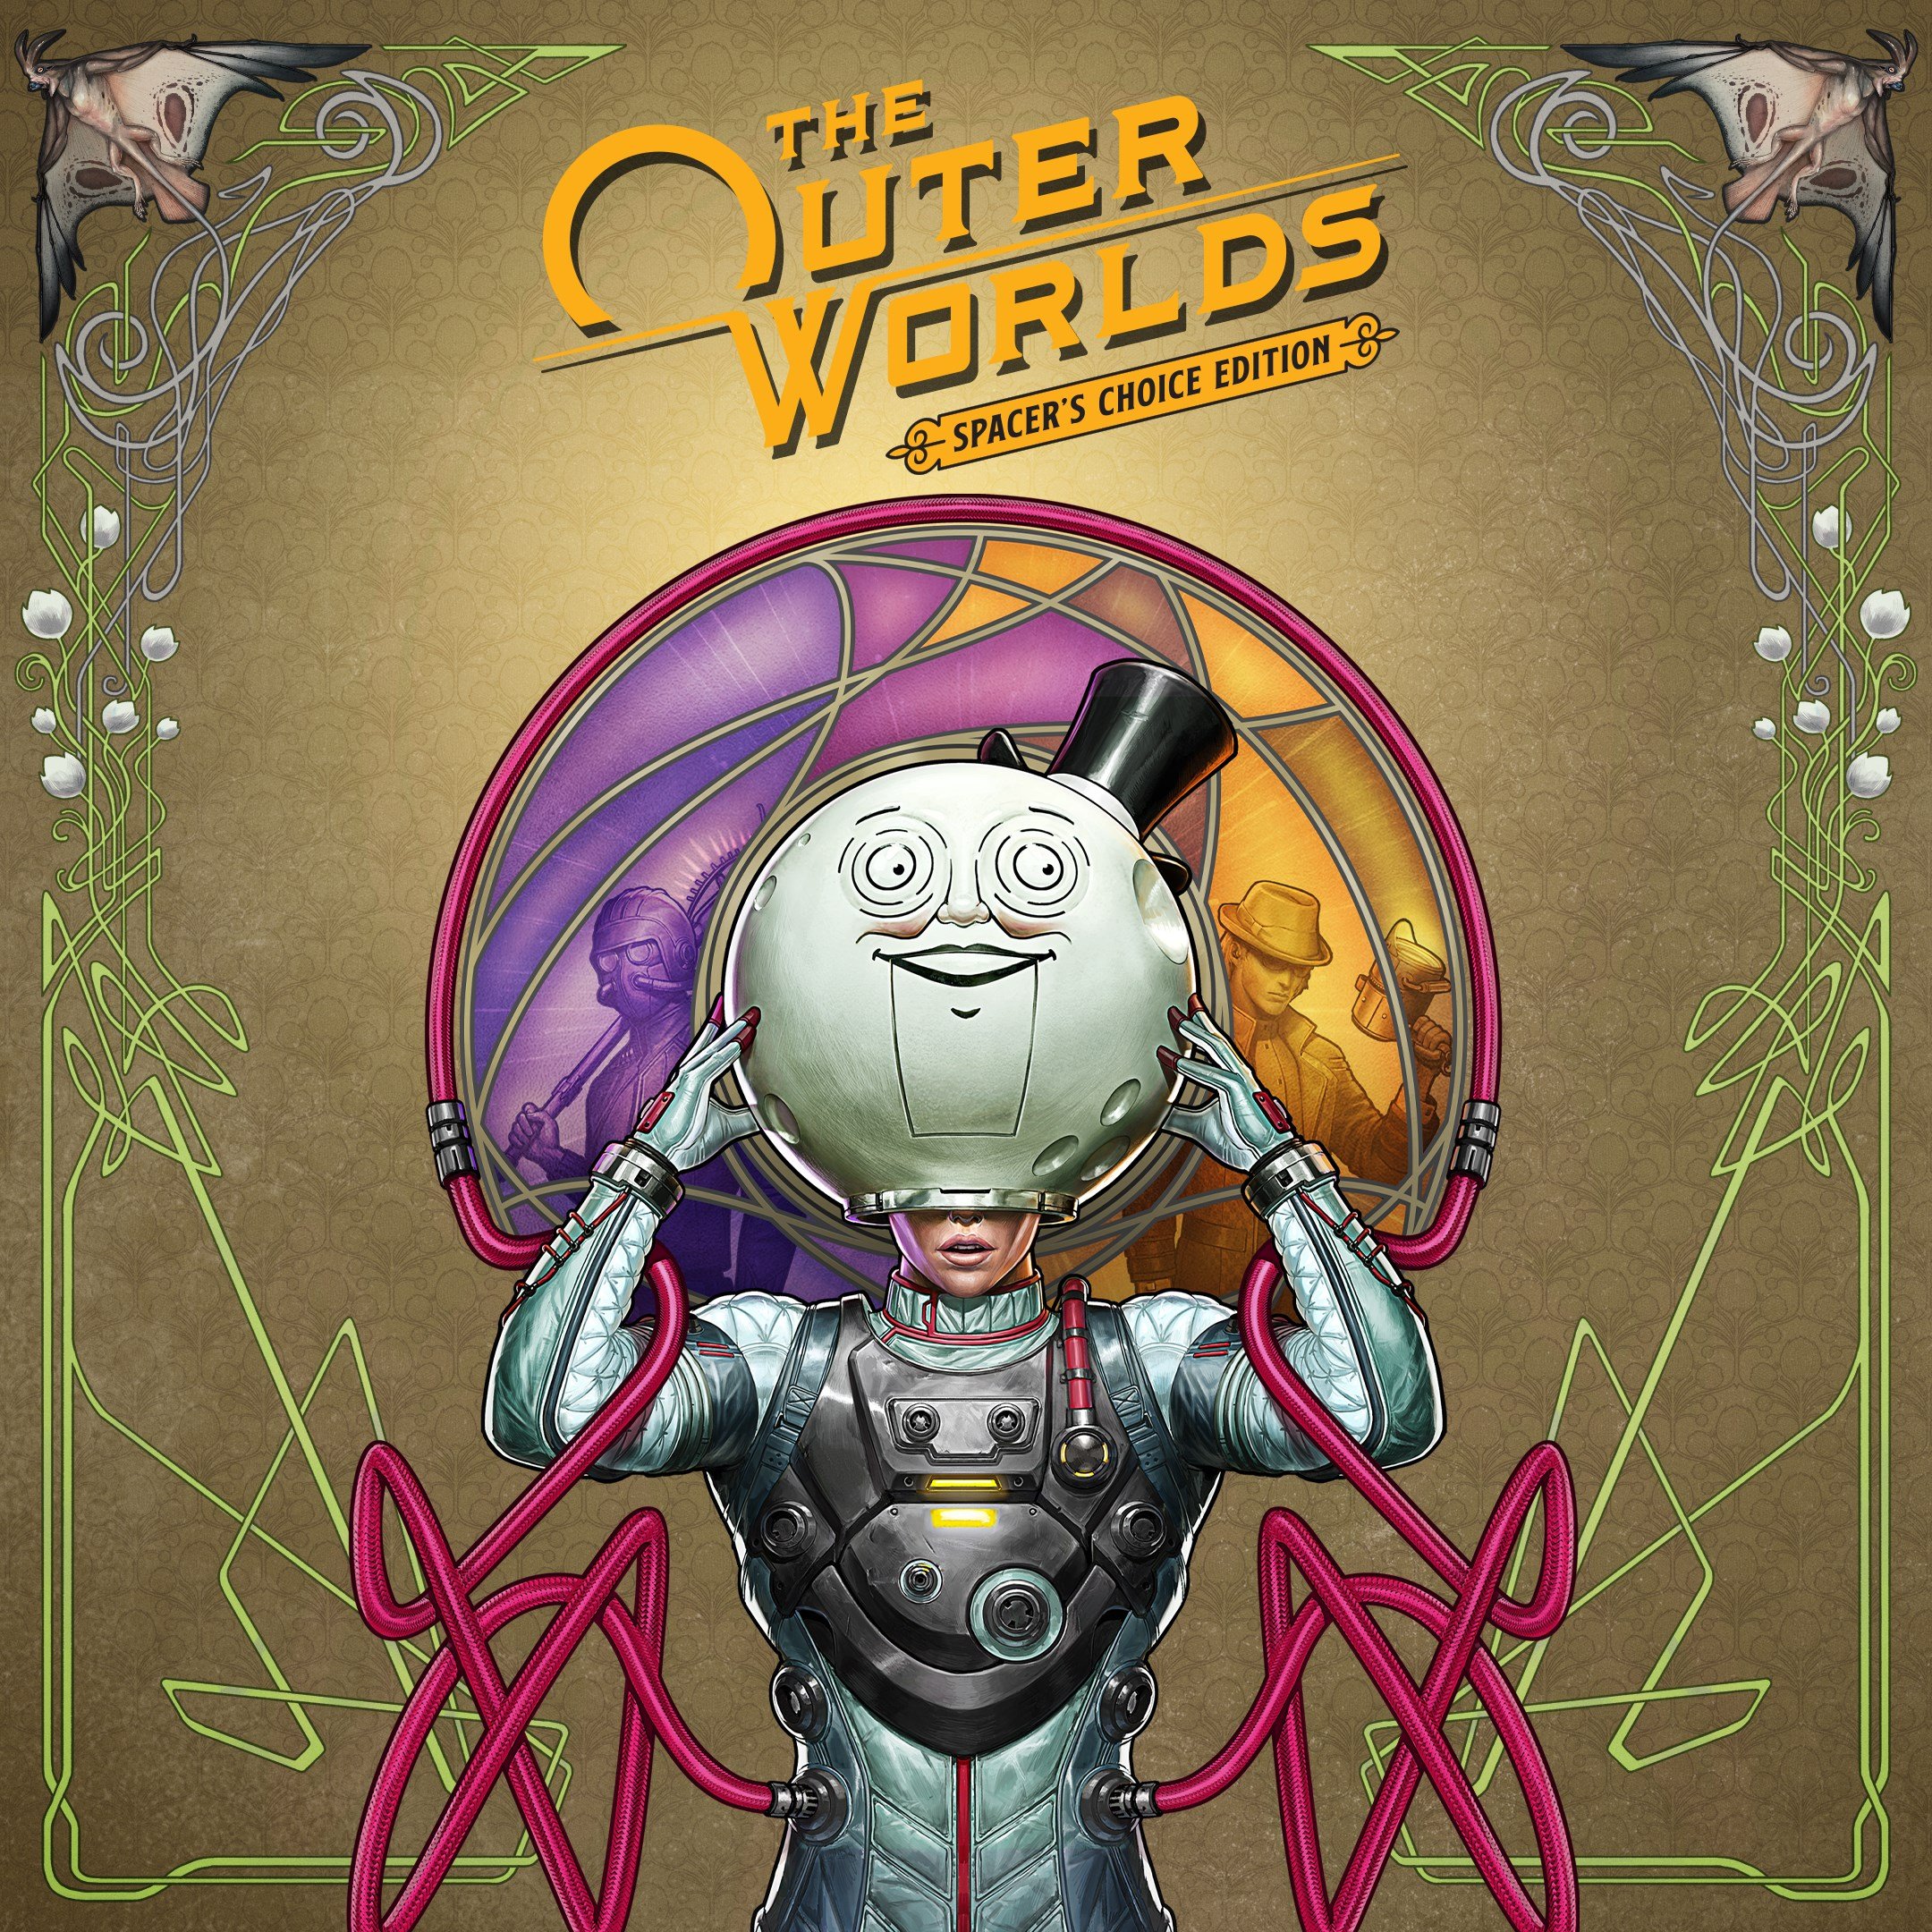 Boxart for The Outer Worlds: Spacer's Choice Edition